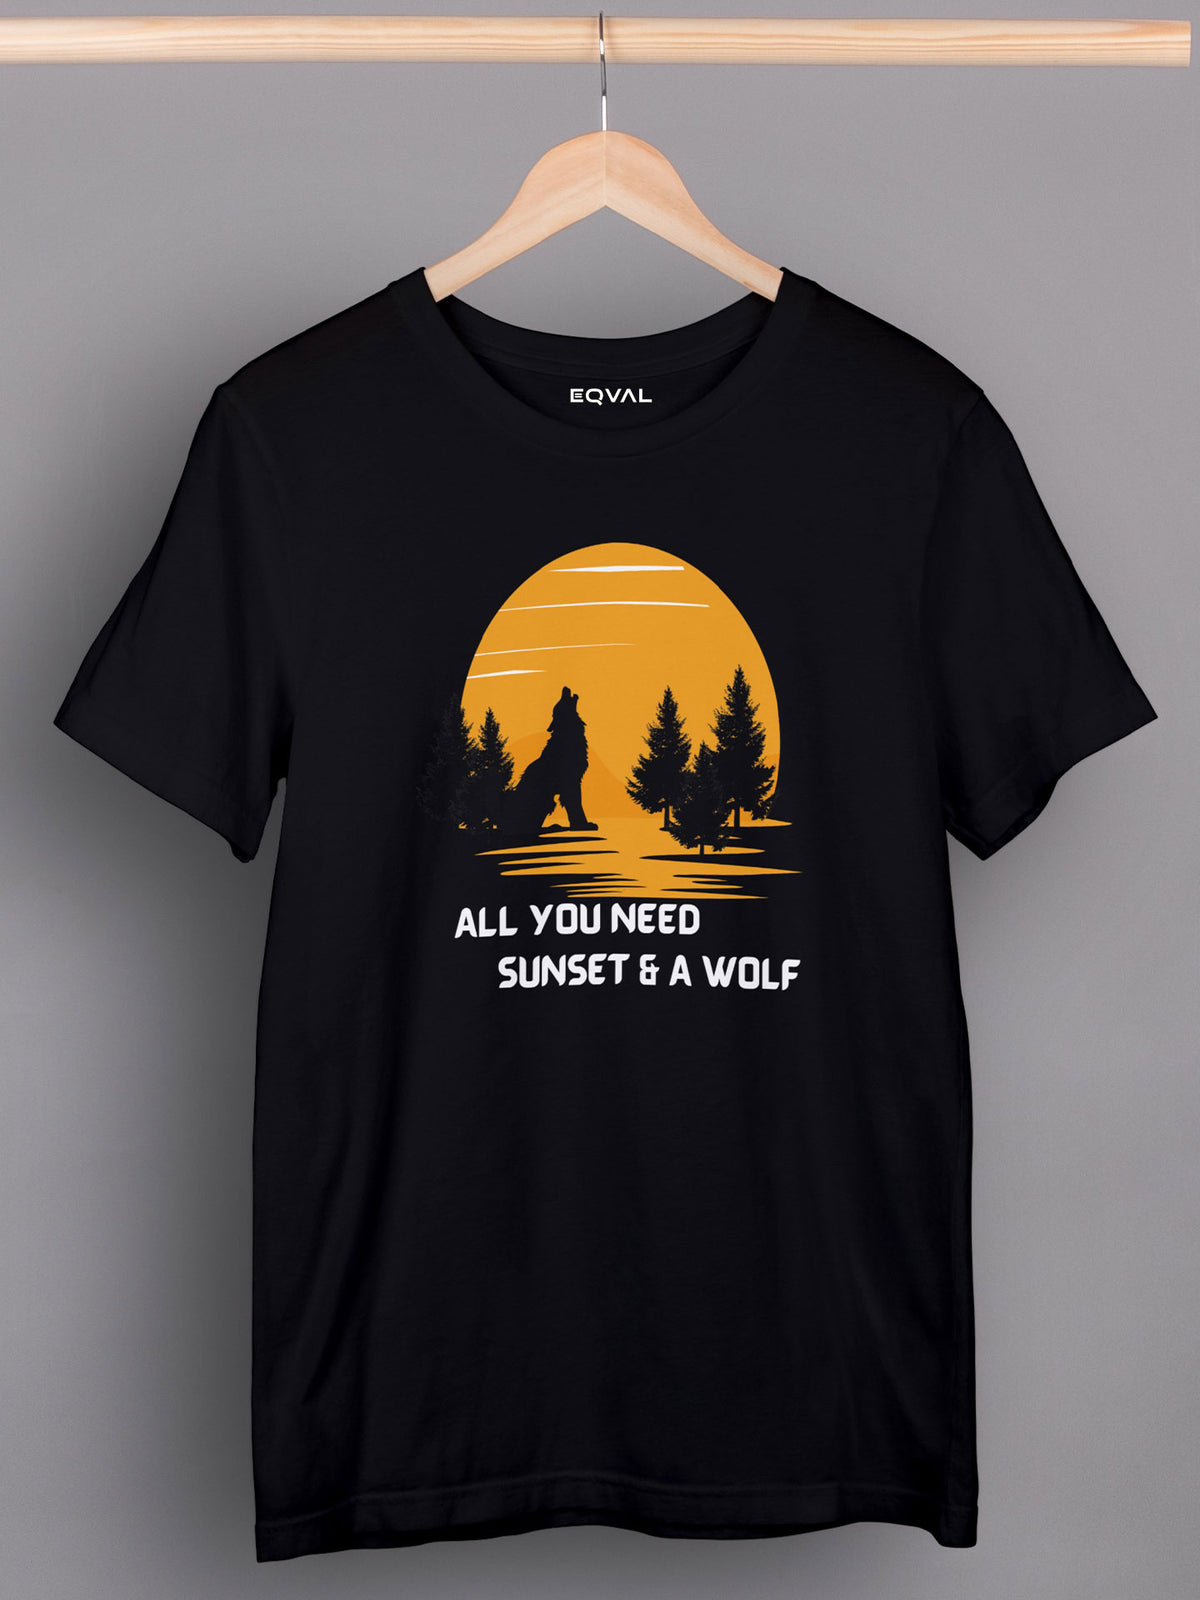 Men's Black All You Need Sunset Printed T-shirt